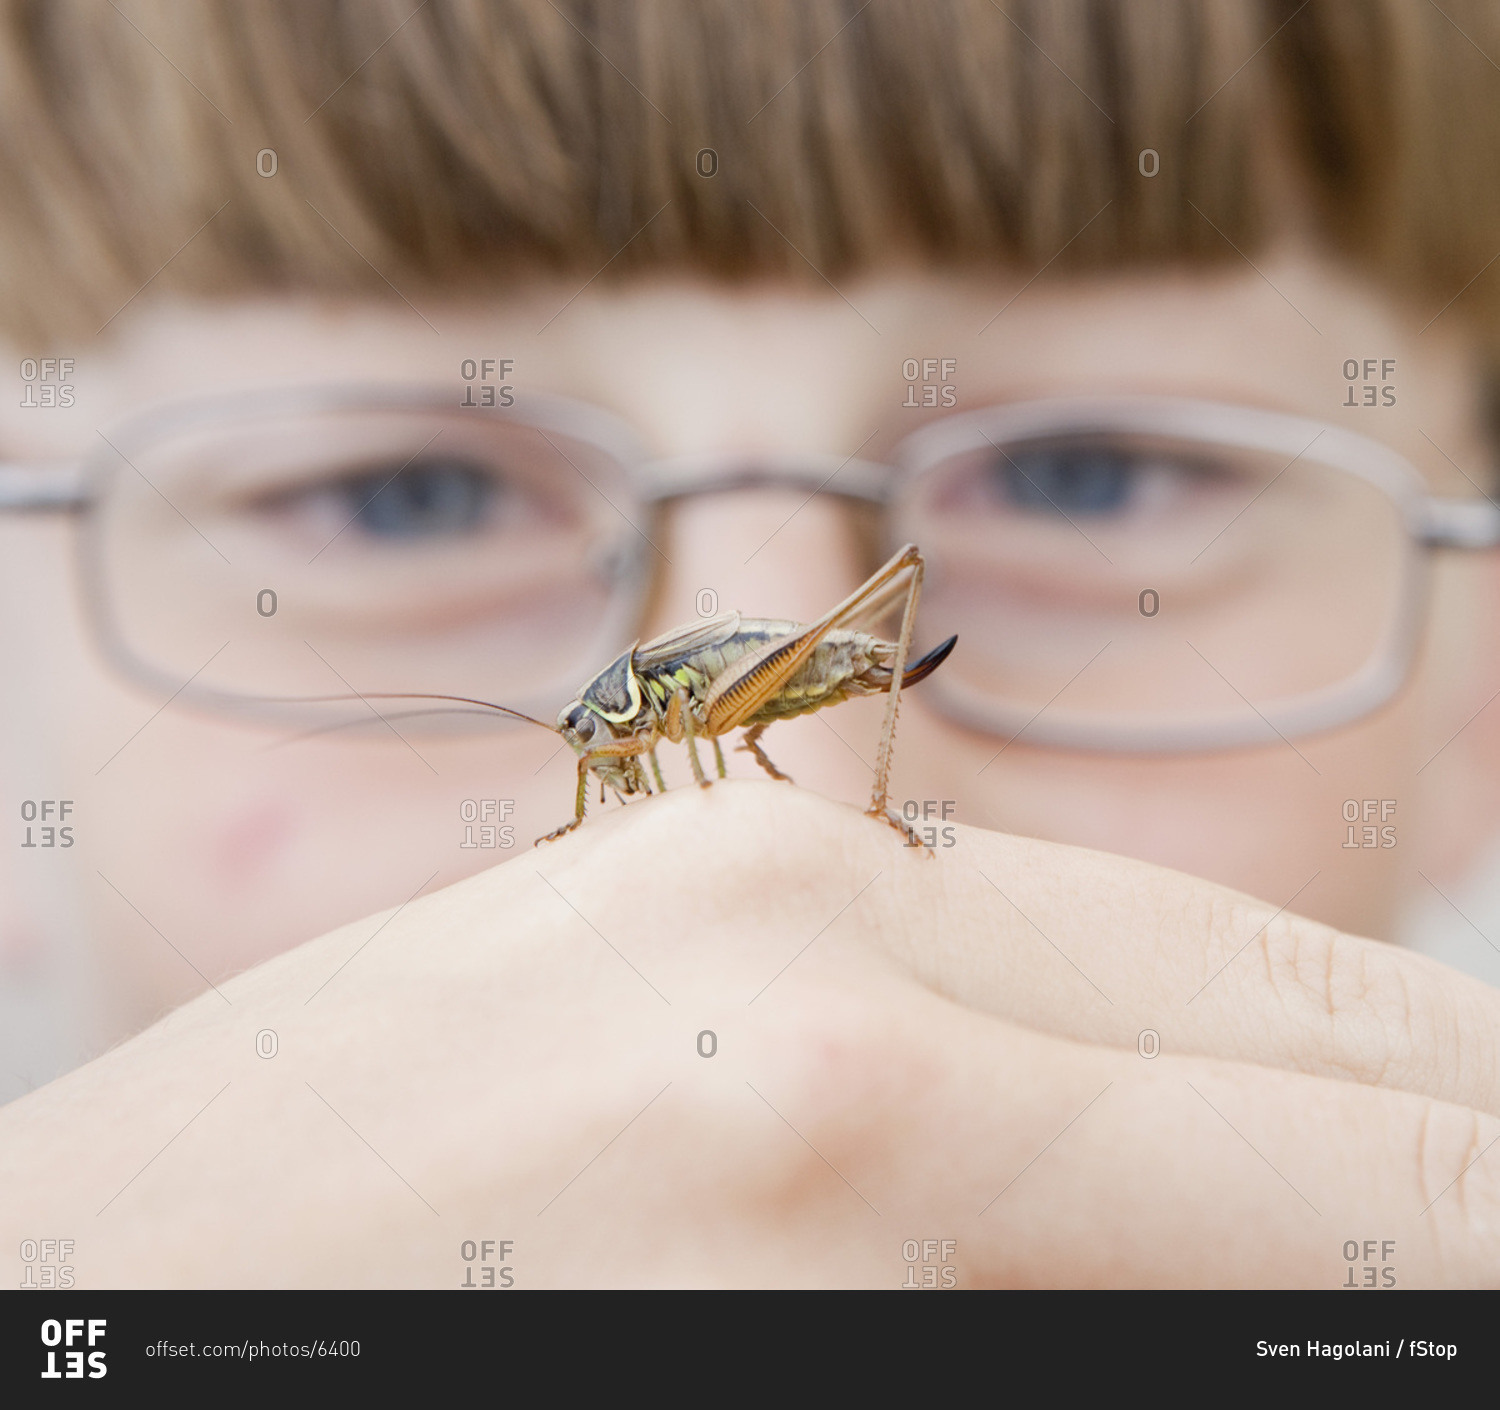 A cricket on the hand of a boy